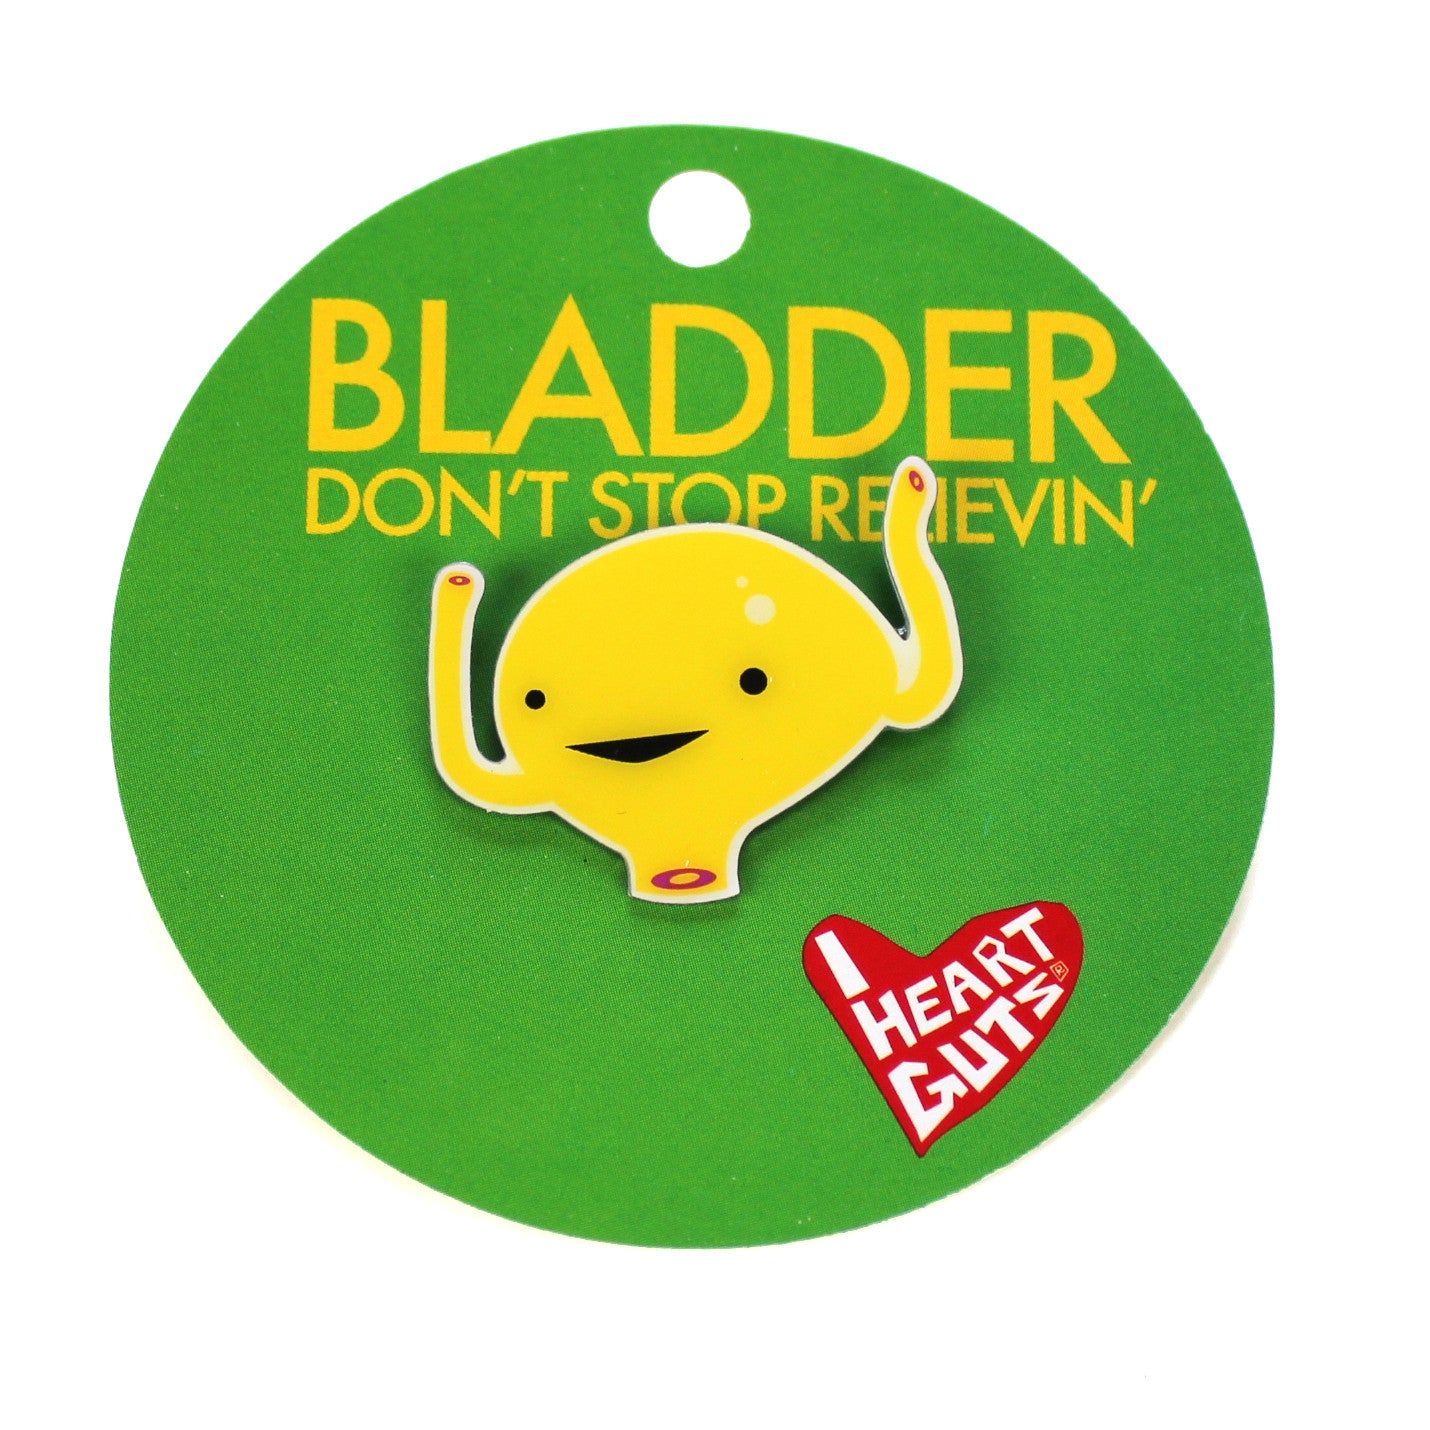 A green background with a yellow illustration of a bladder with a mouth and eyes.